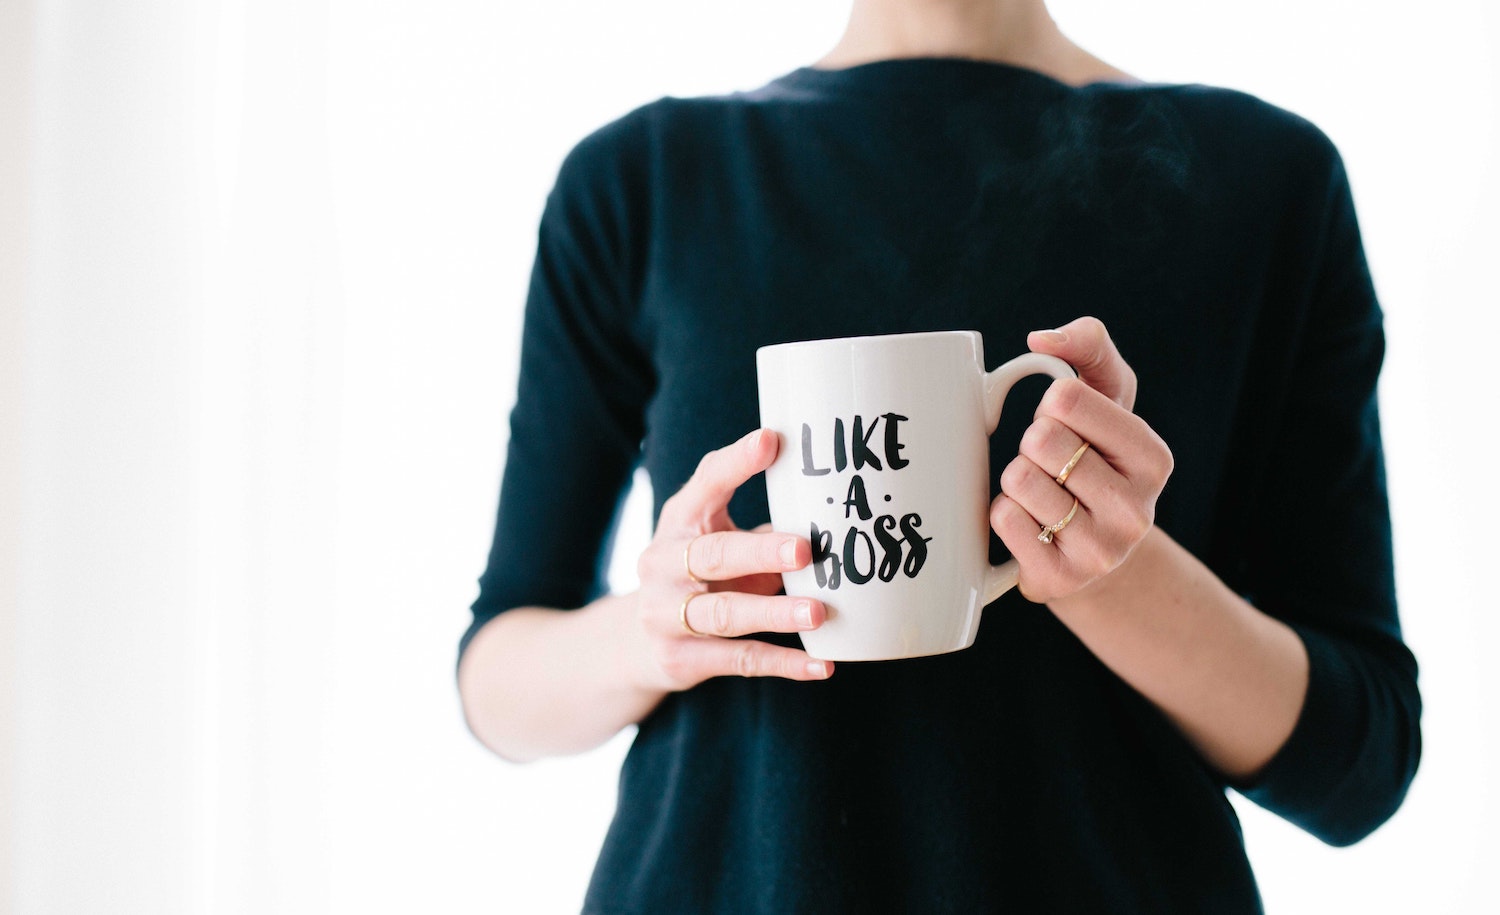 A highly sensitive person (woman) leading and holding a "like a boss" mug